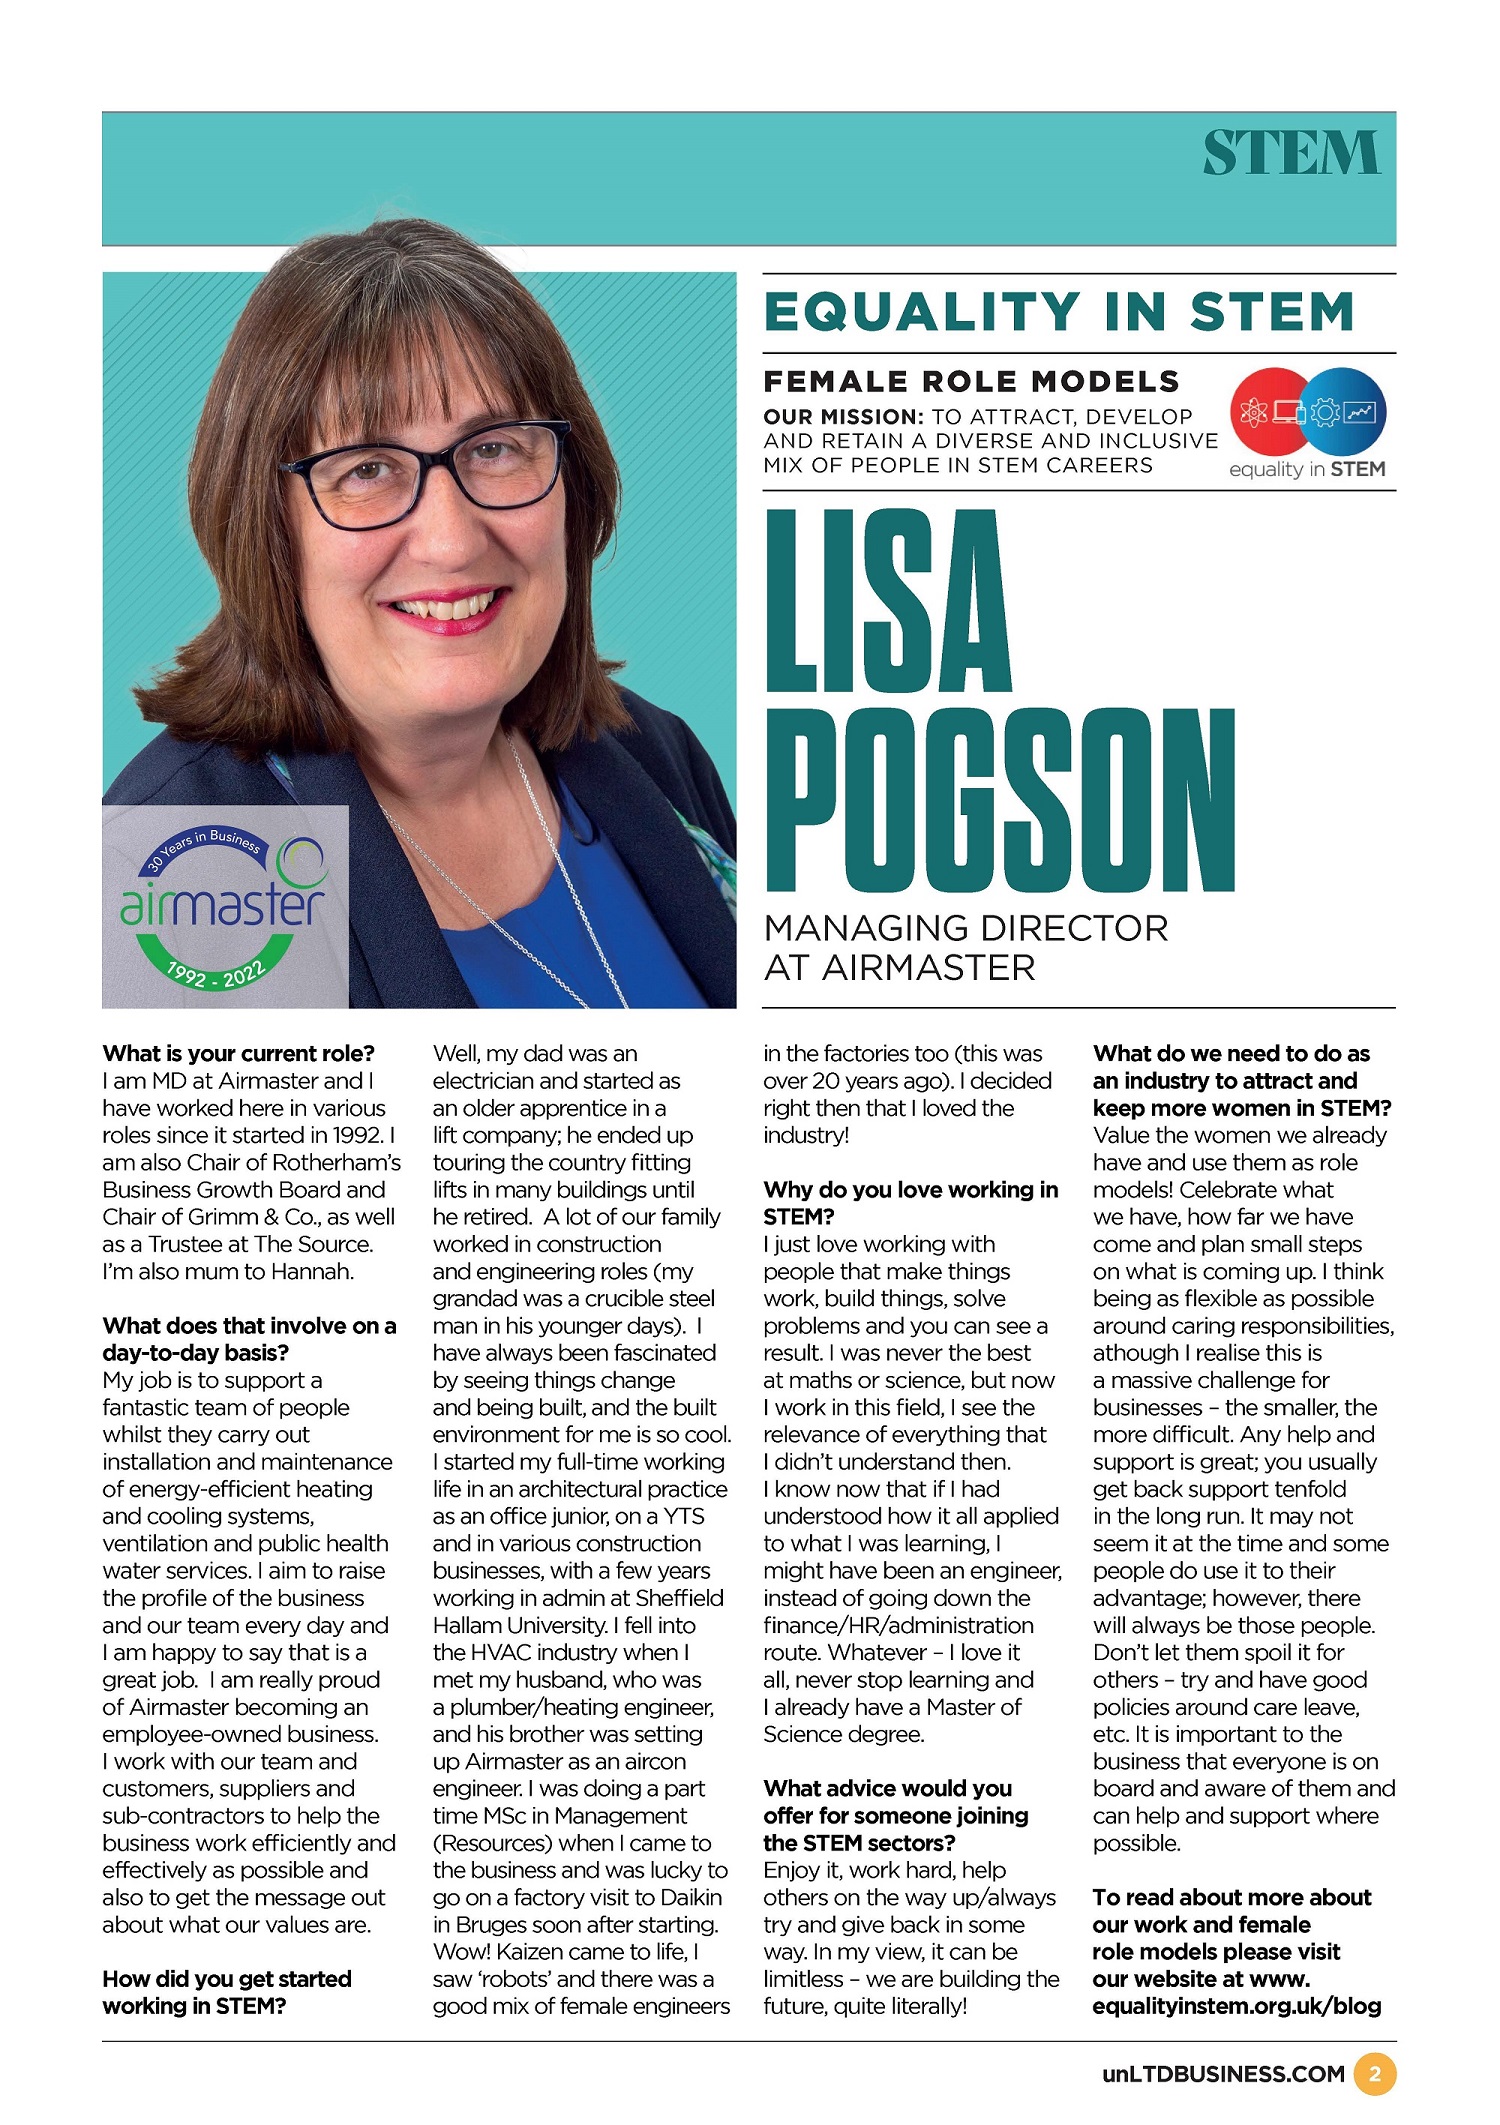 Second image for, Equality in STEM - Female Role Model column - Lisa Pogson, Managing Director, Airmaster, news article